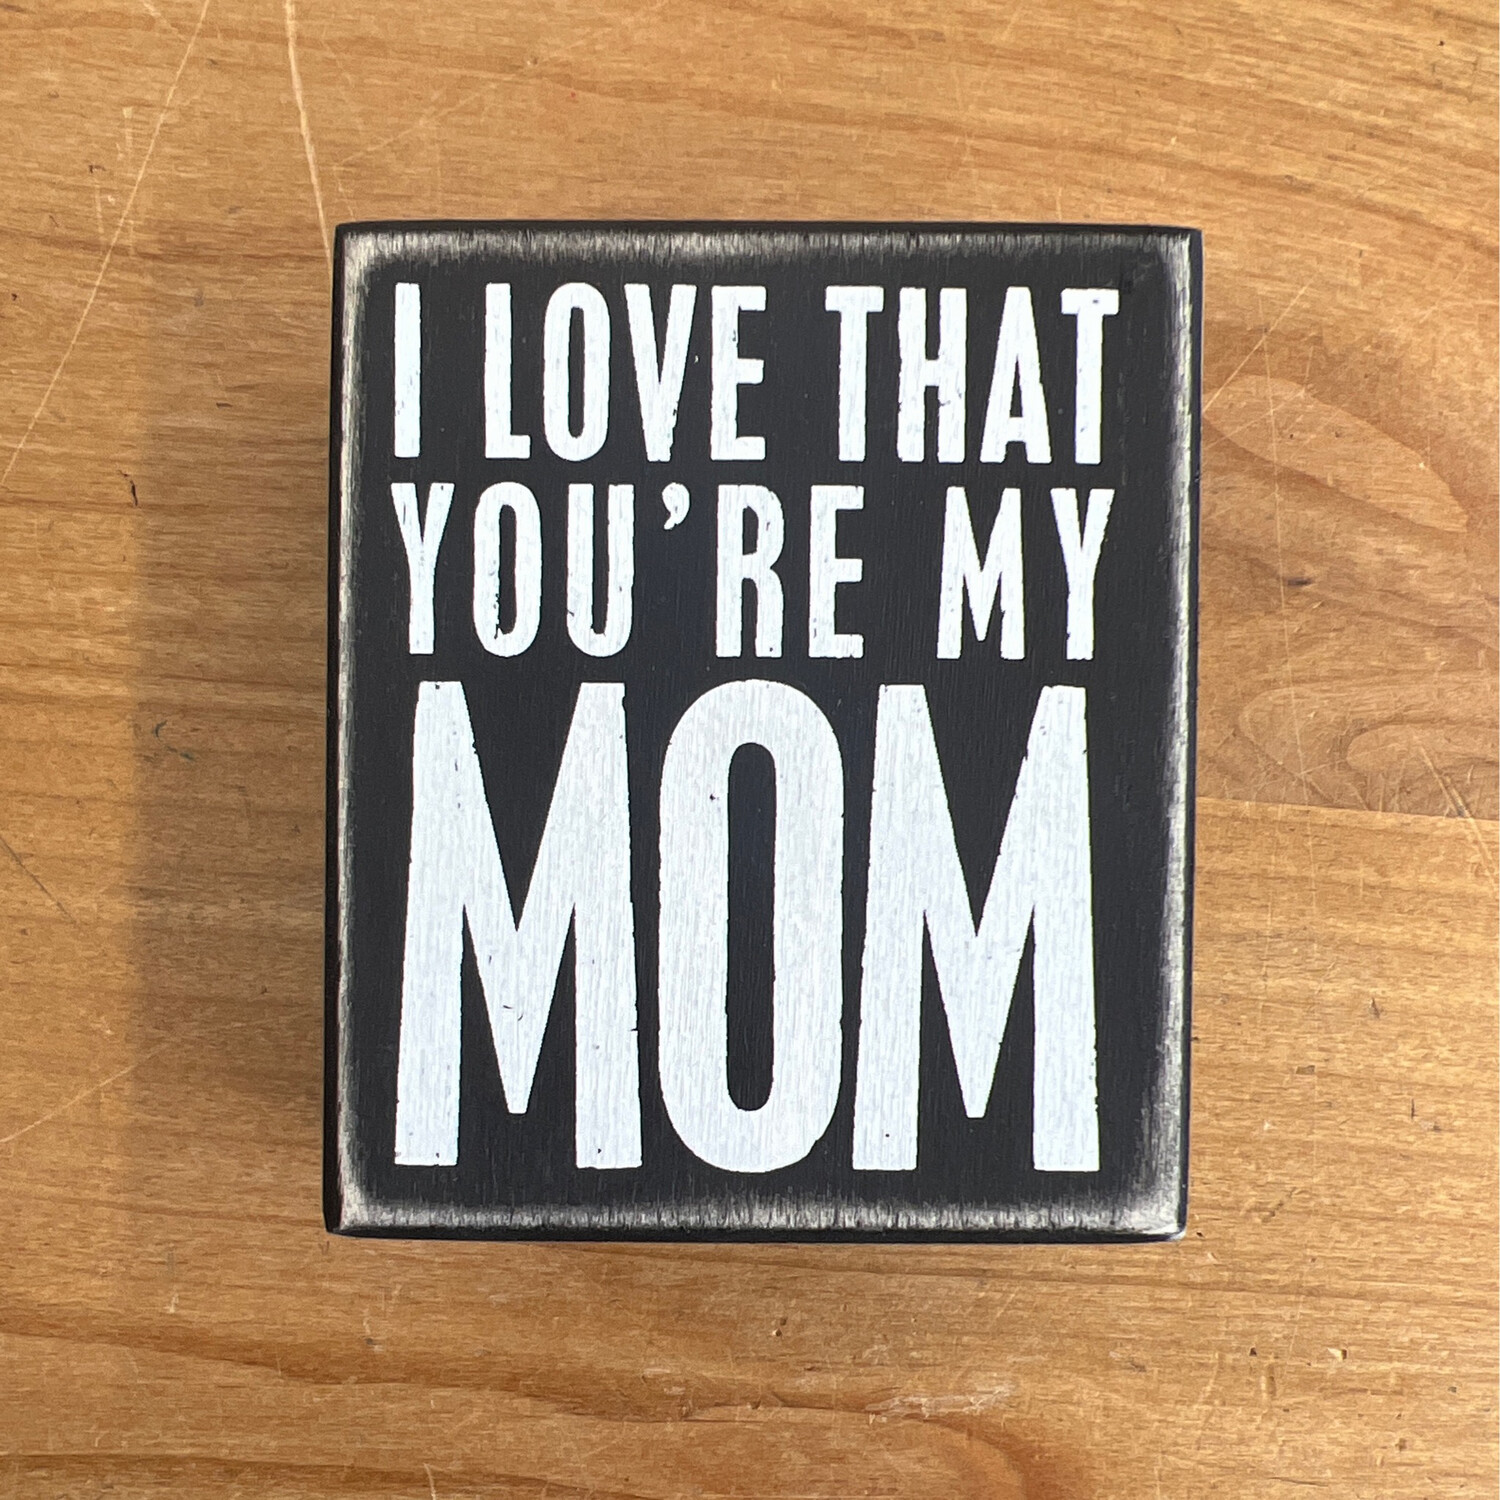 I Love That You're My Mom Sign